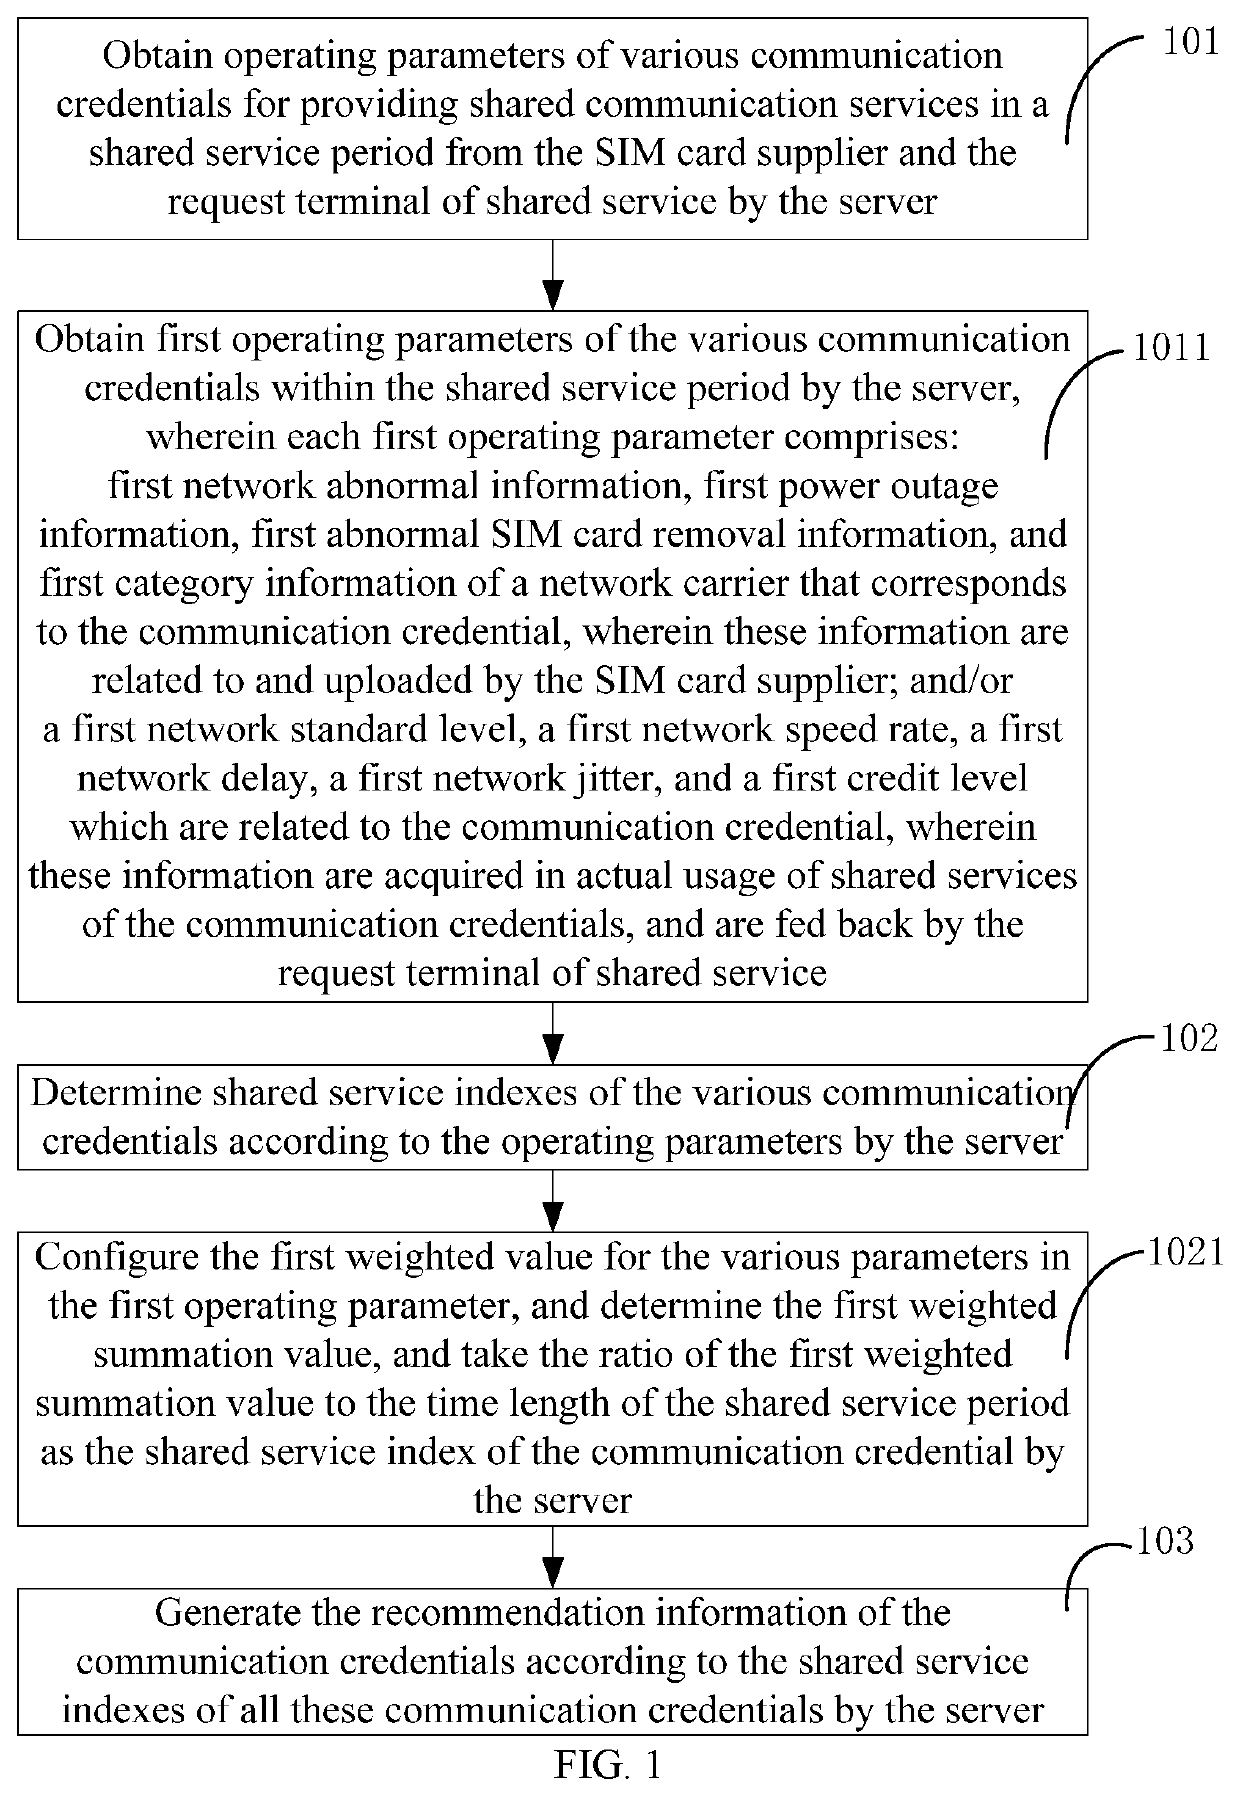 Method of determining shared service index based on shared service of communication credential